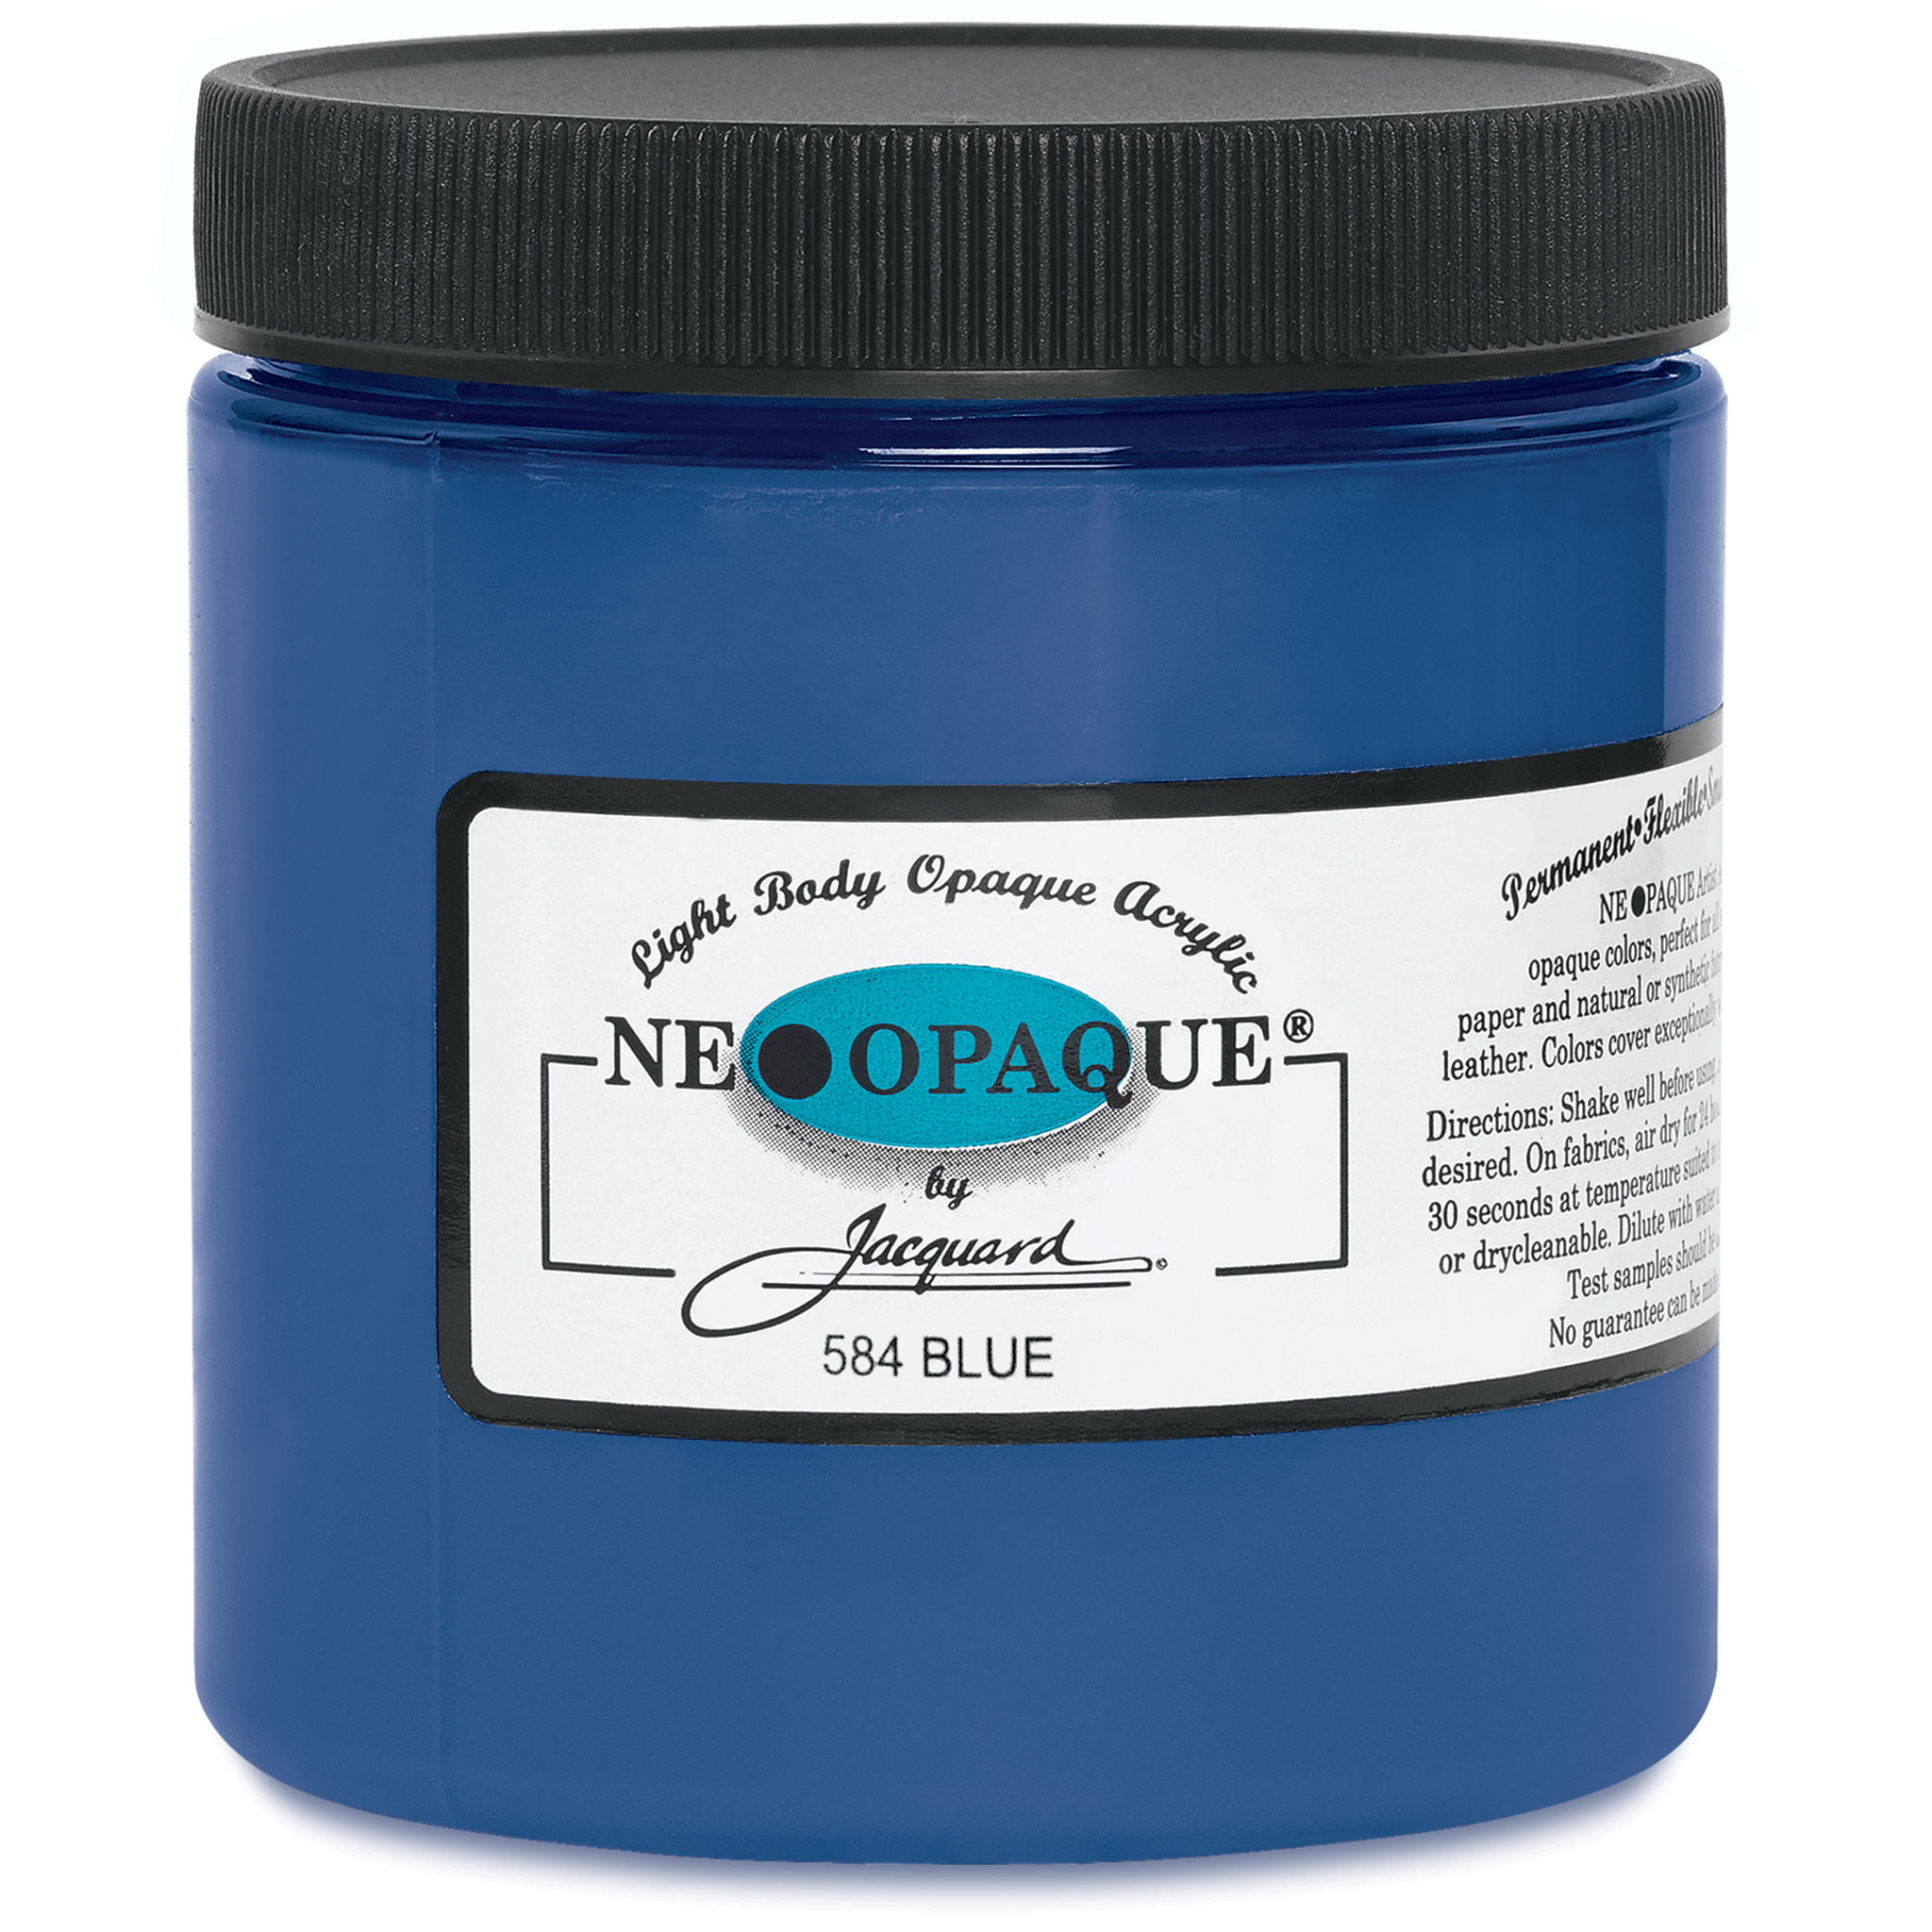 Jacquard Neopaque Acrylic Paints and Sets